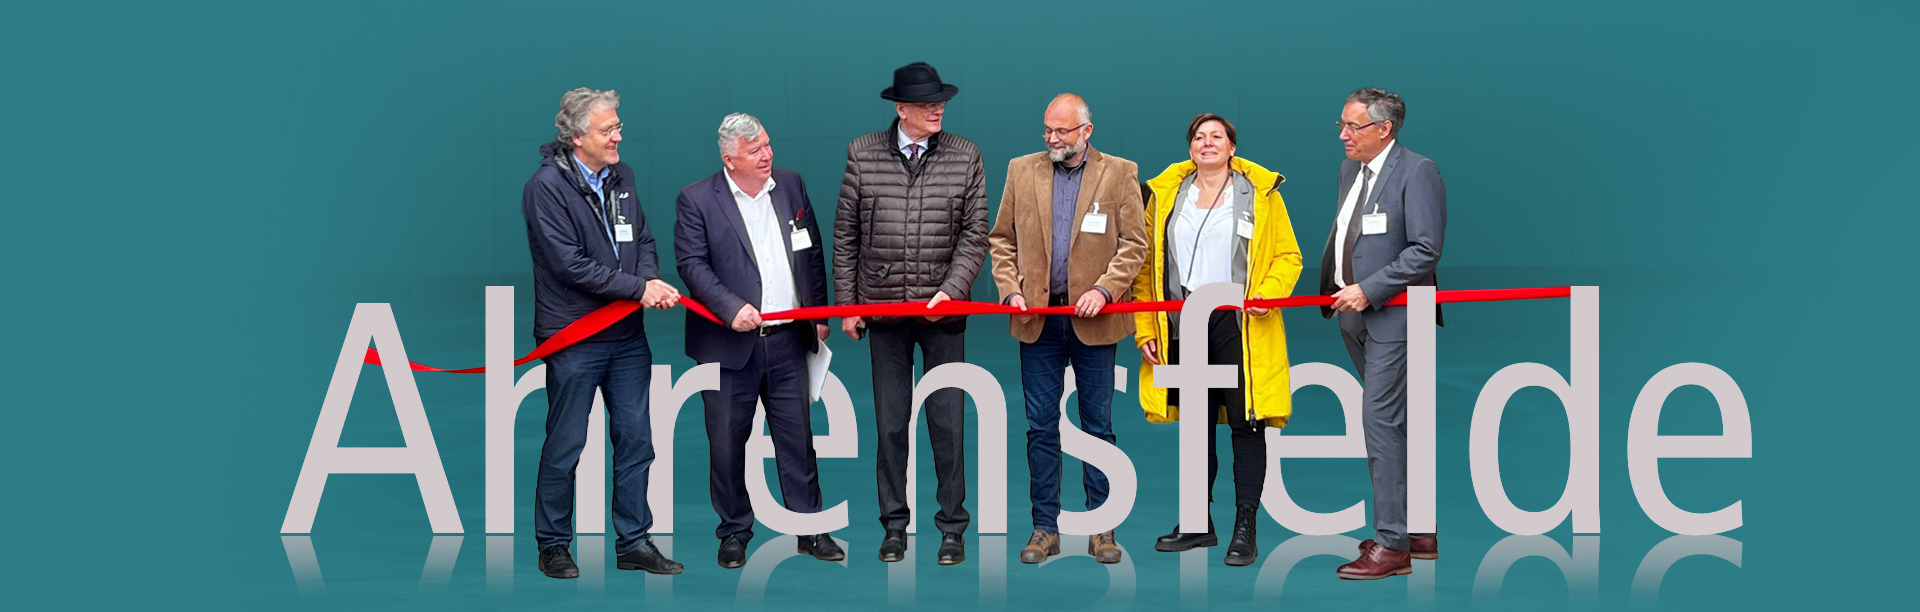 New composting and digestion plant opened in Ahrensfelde